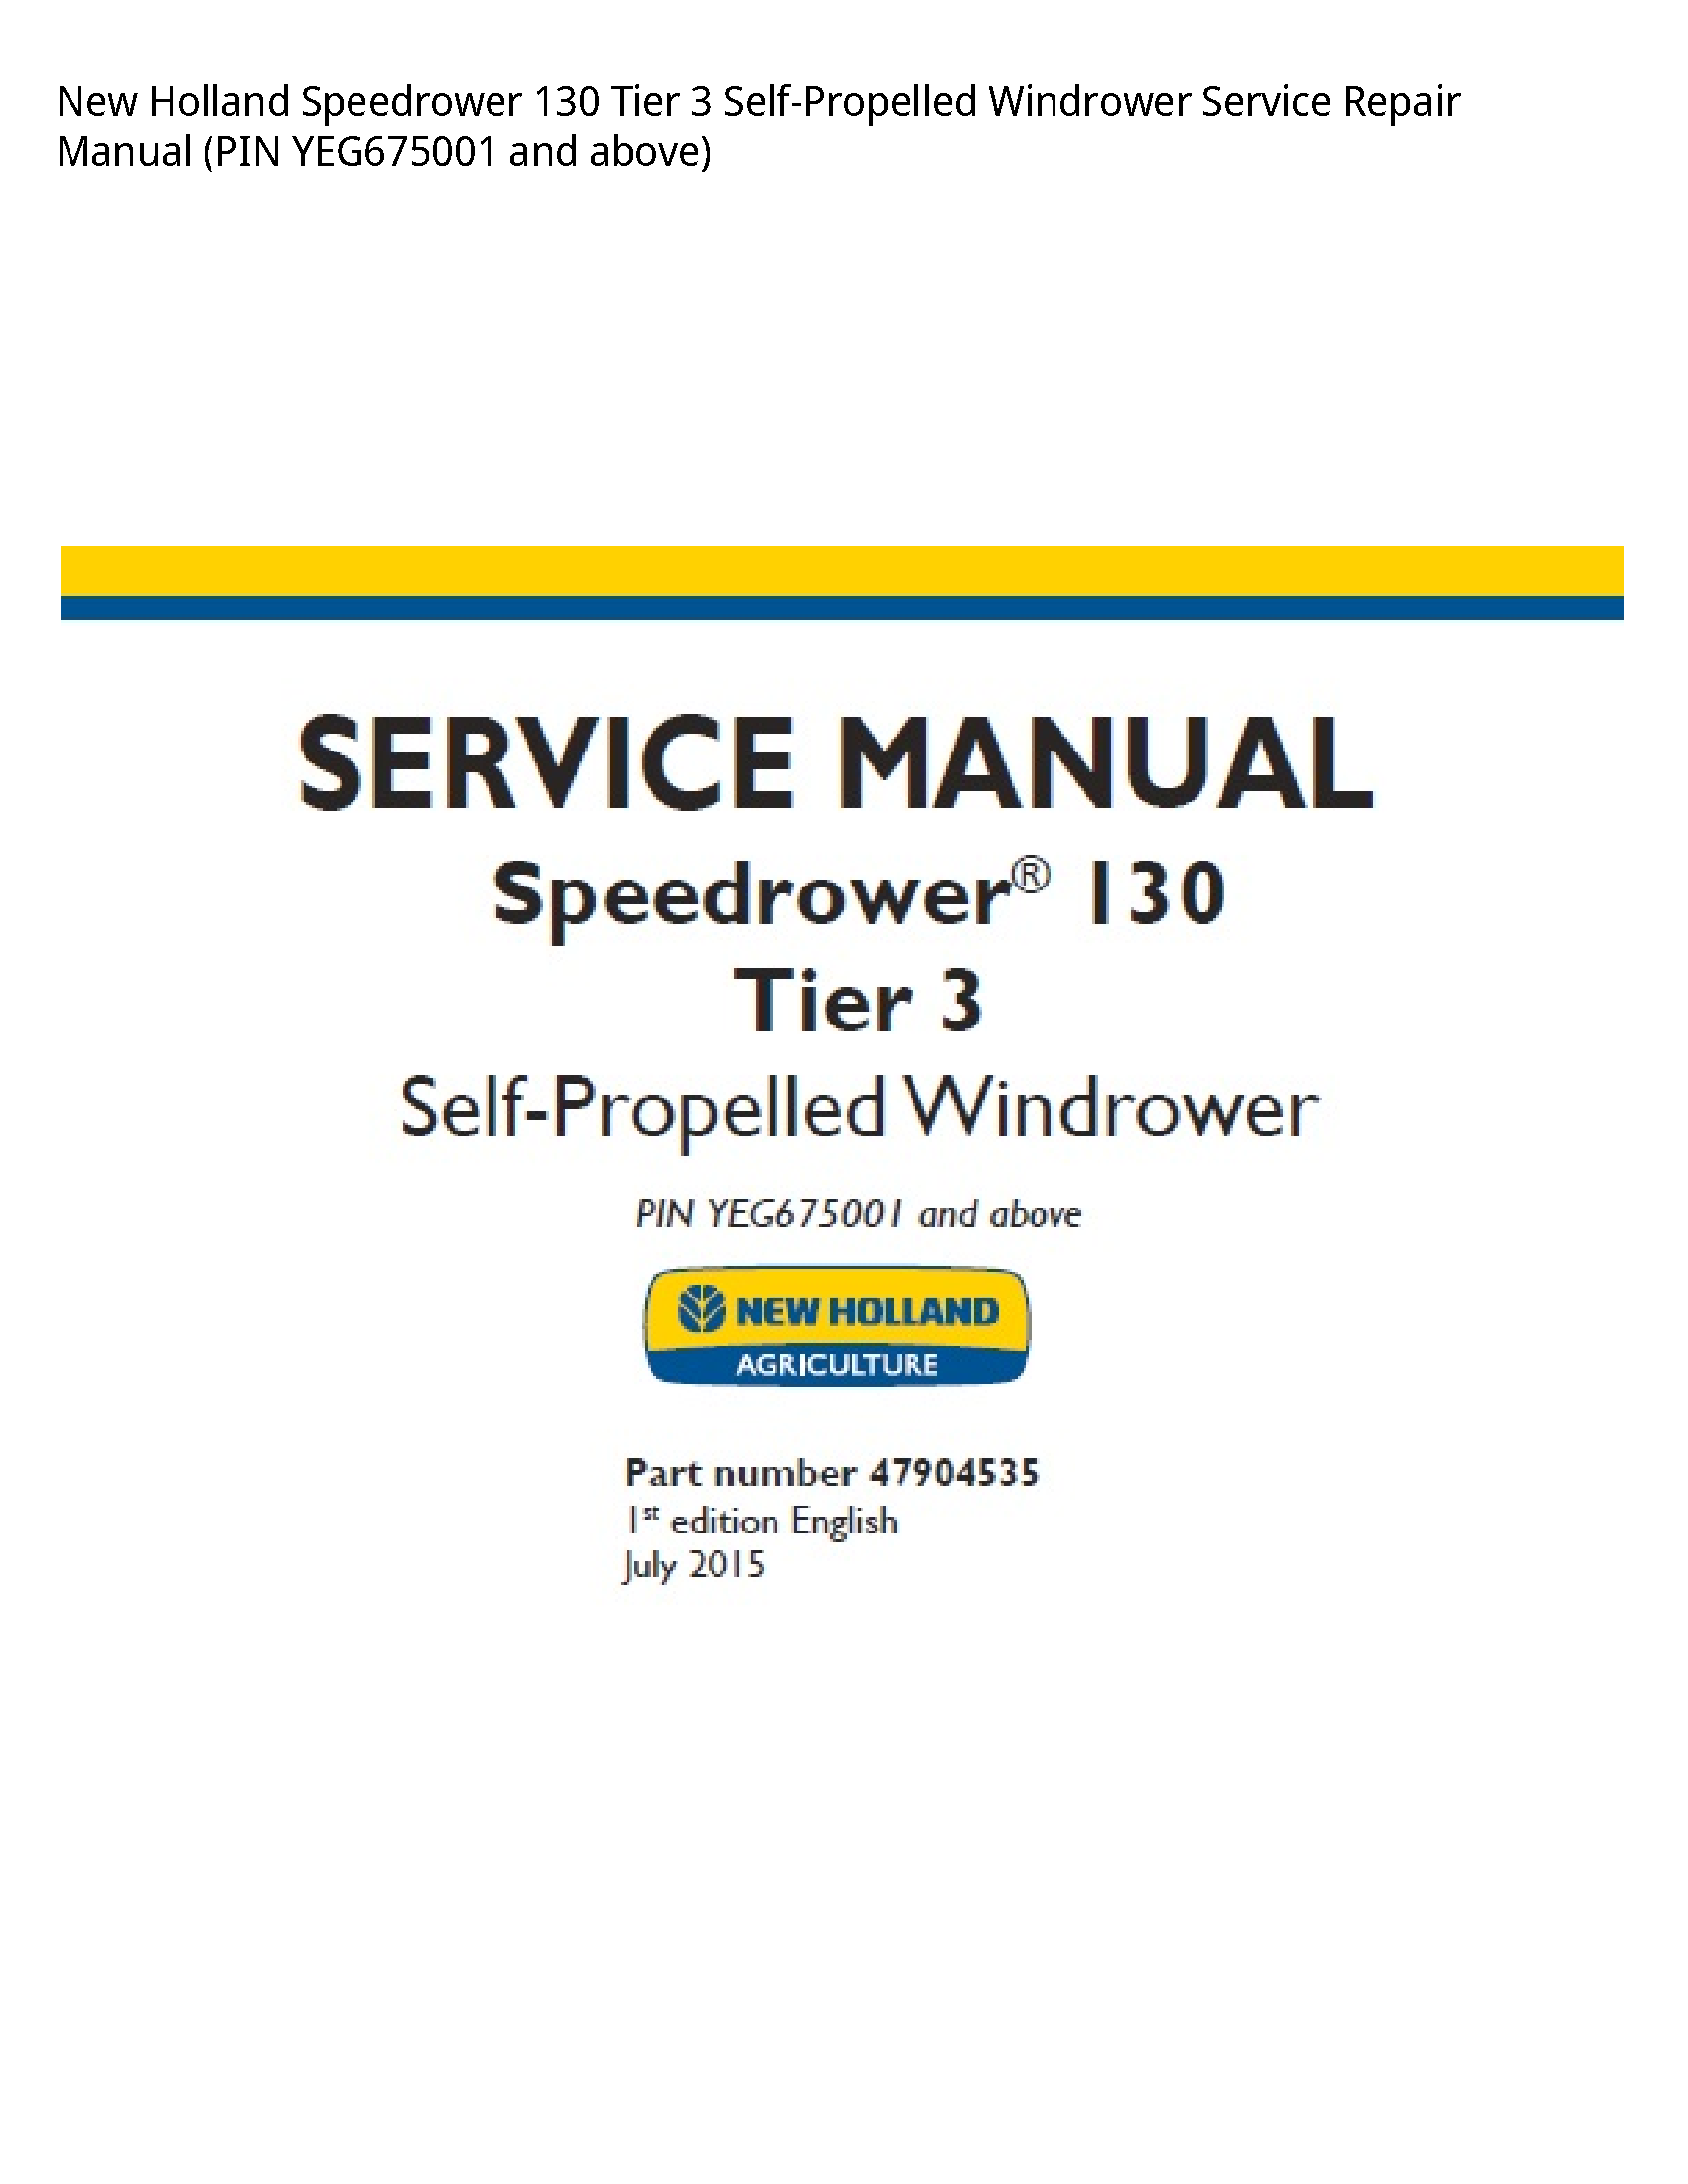 New Holland 130 Speedrower Tier Self-Propelled Windrower manual